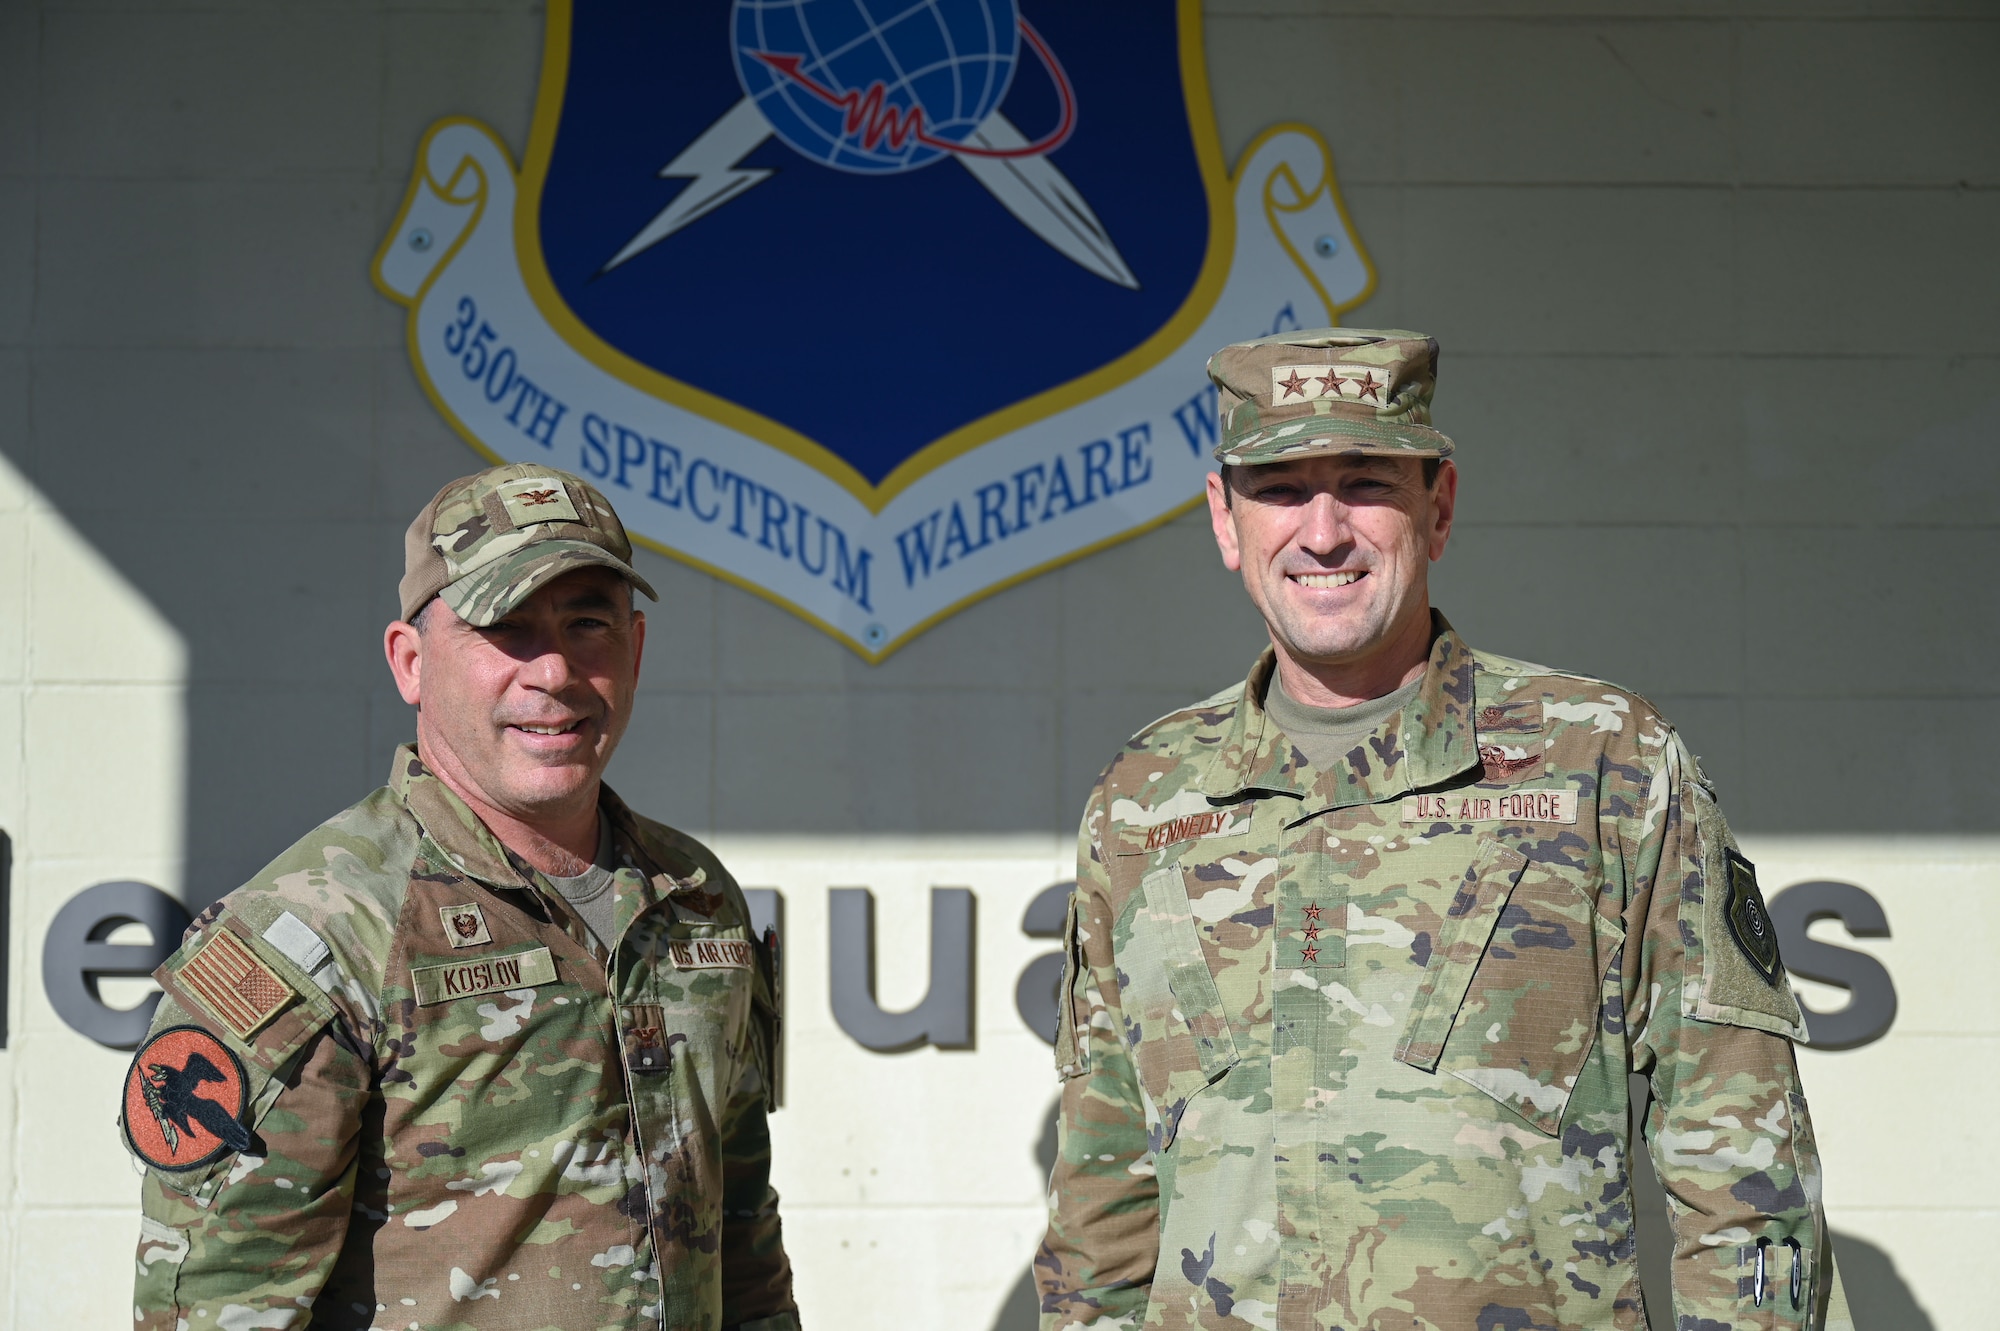 U.S. Air Force Col. Josh Koslov, 350th Spectrum Warfare Wing commander and Lt. Gen. Kevin Kennedy, Commander, 16th Air Force (Air Force Cyber), pose for a photo, at Eglin Air Force Base, Fla., Nov. 3, 2023. The 350th SWW mission is to develop and employ evolutionary, cutting-edge capabilities for warfighters that will make decisive impacts in battle, achieving commanders’ objectives and allowing warfighters to beat pacing competitors across the spectrum. (U.S. Air Force photo by Staff Sgt. Ericka A. Woolever)